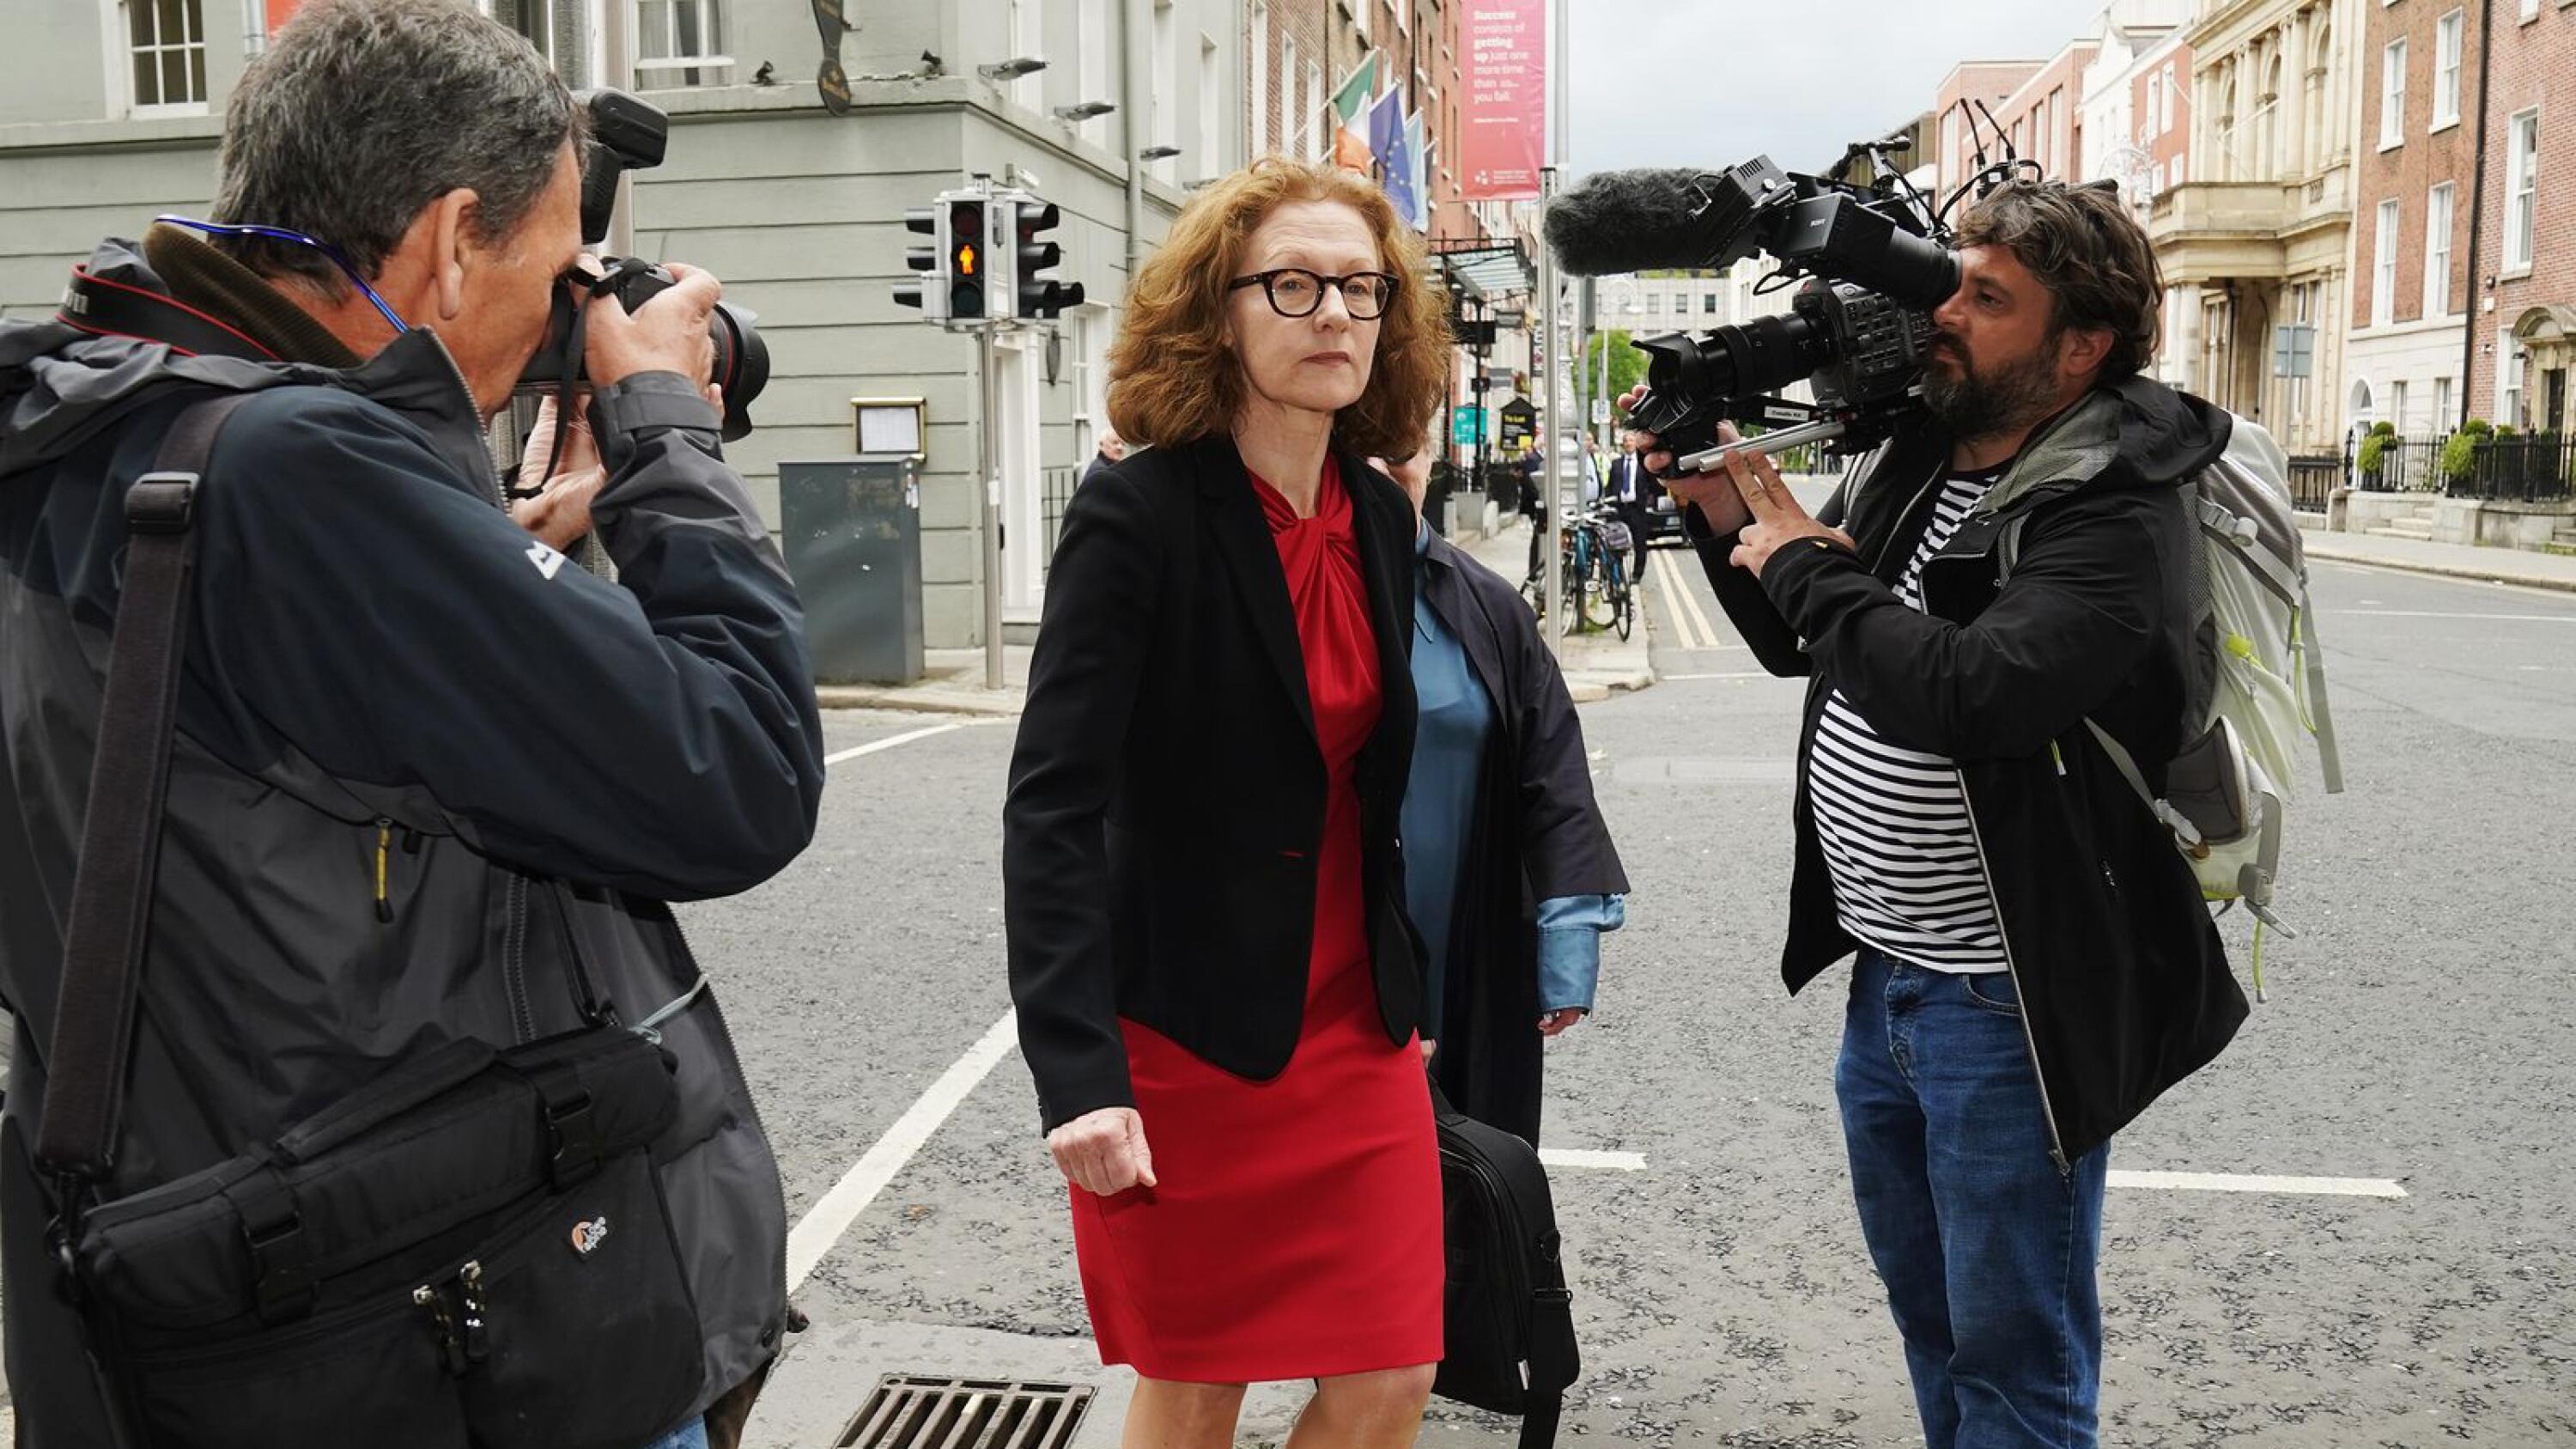 Analysis: Fractures emerge between RTÉ's top brass as TDs watch